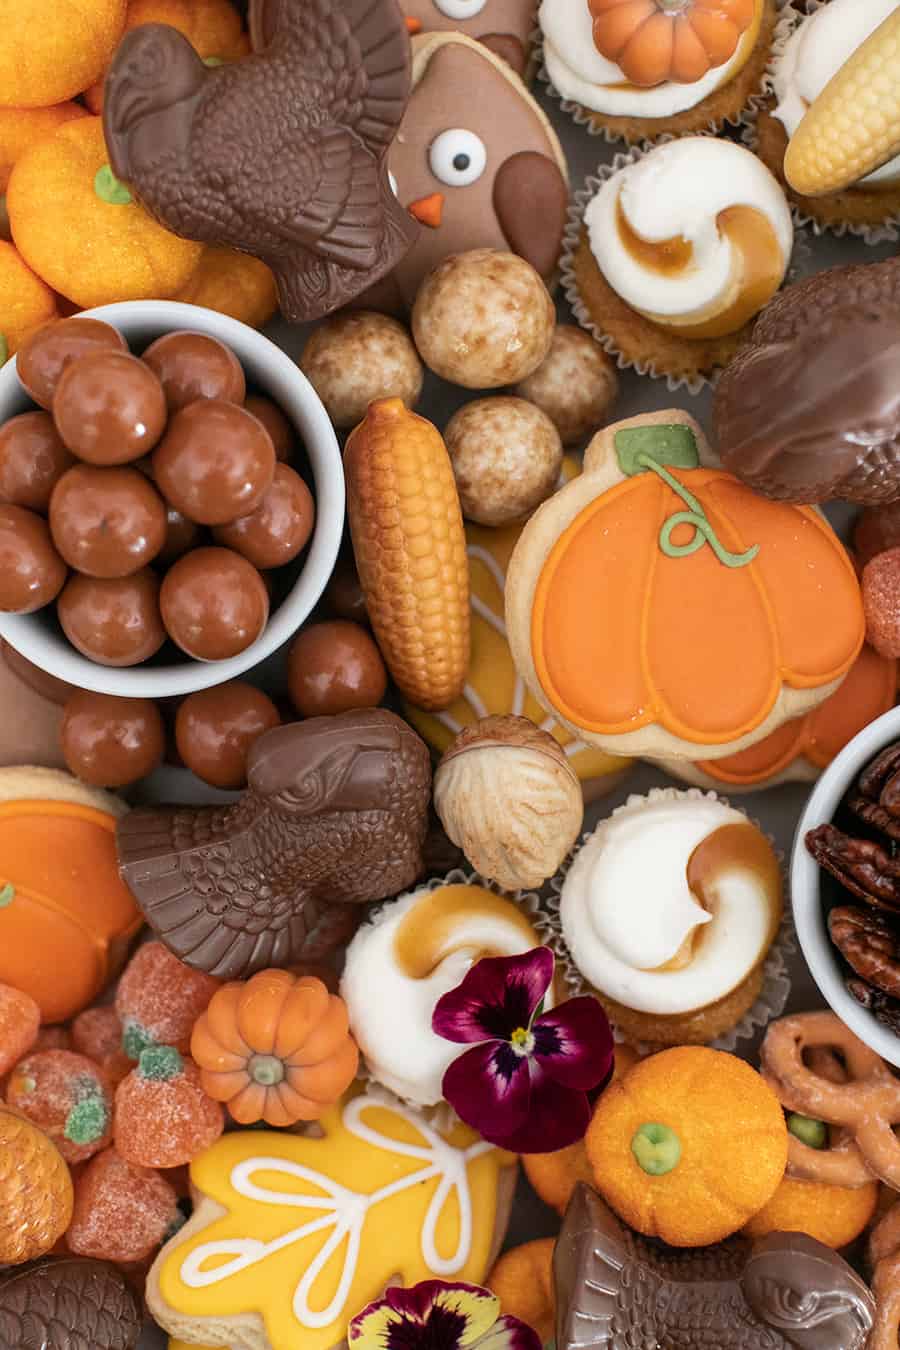 Chocolate covered turkey, cupcakes, pumpkins and cookies on a platter.